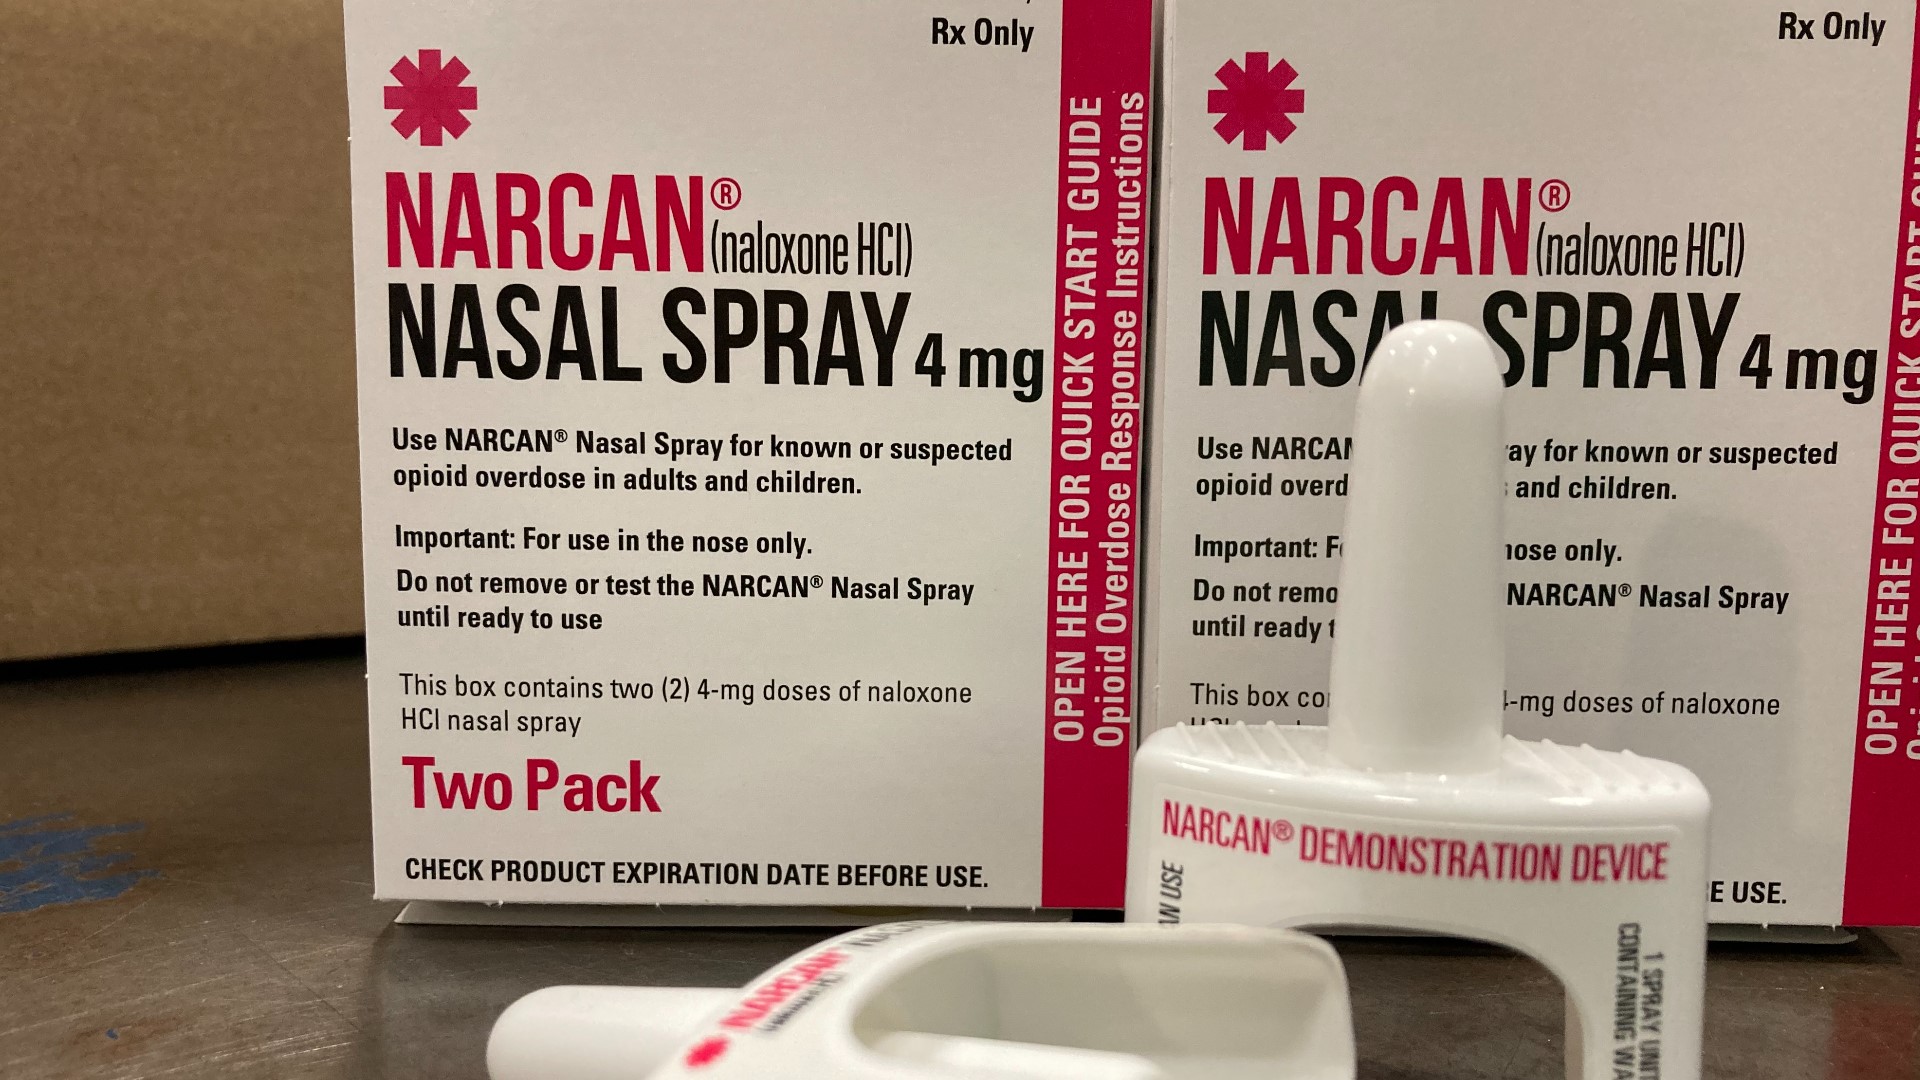 The FDA has approved selling overdose antidote naloxone over-the-counter, marking the first time an opioid treatment drug will be available without a prescription.